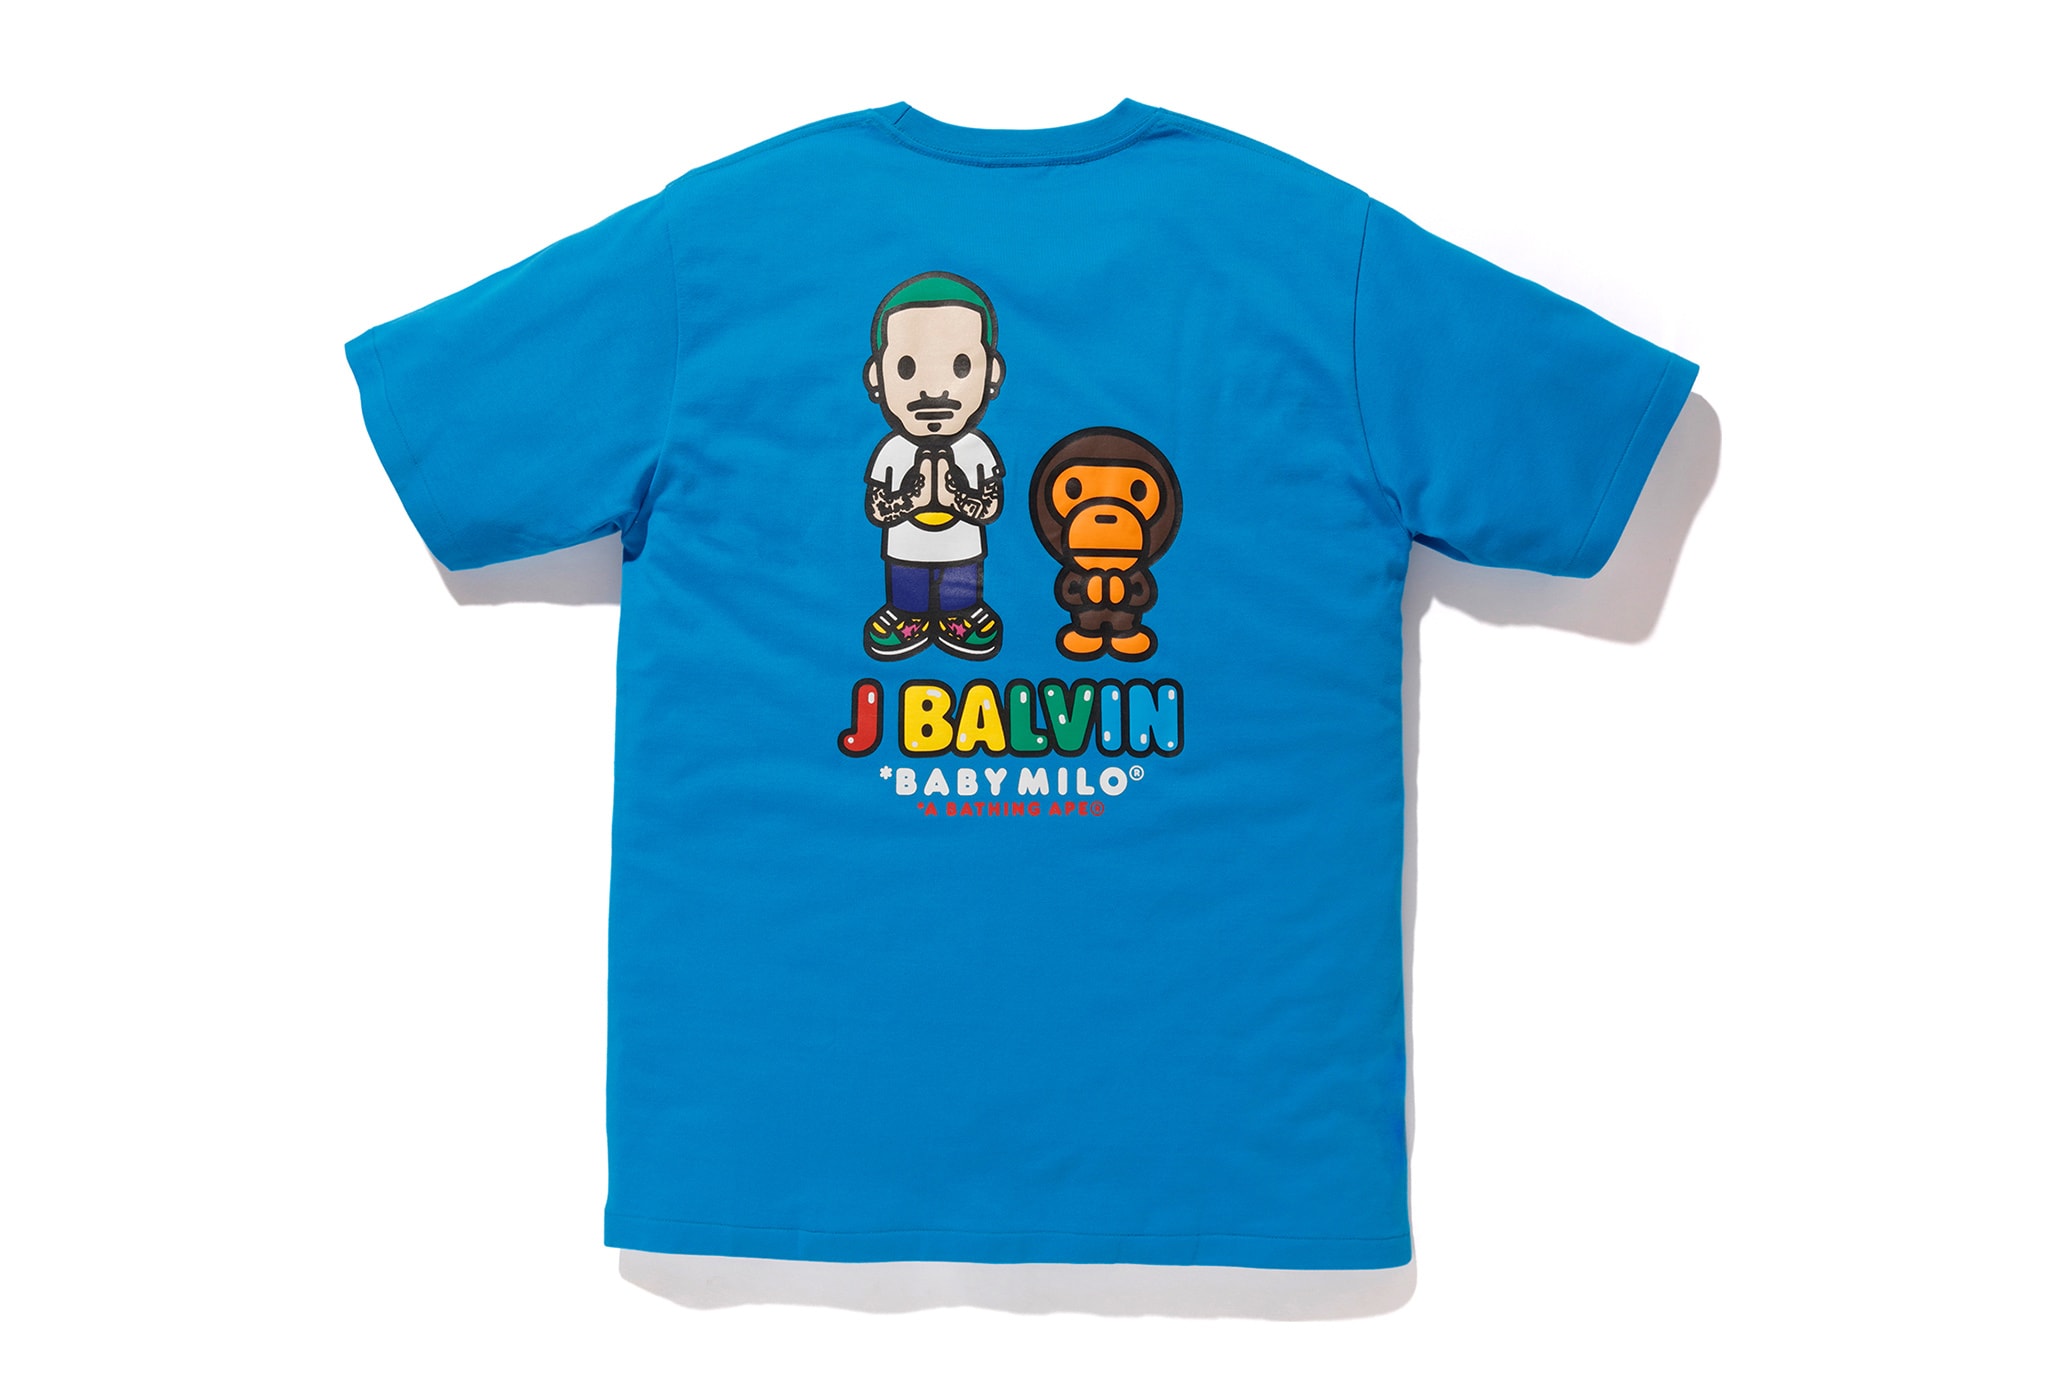 a bathing ape bape collection j balvin collaboration capsule t-shirts hoodies apparel colorful miami exclusive baby milo